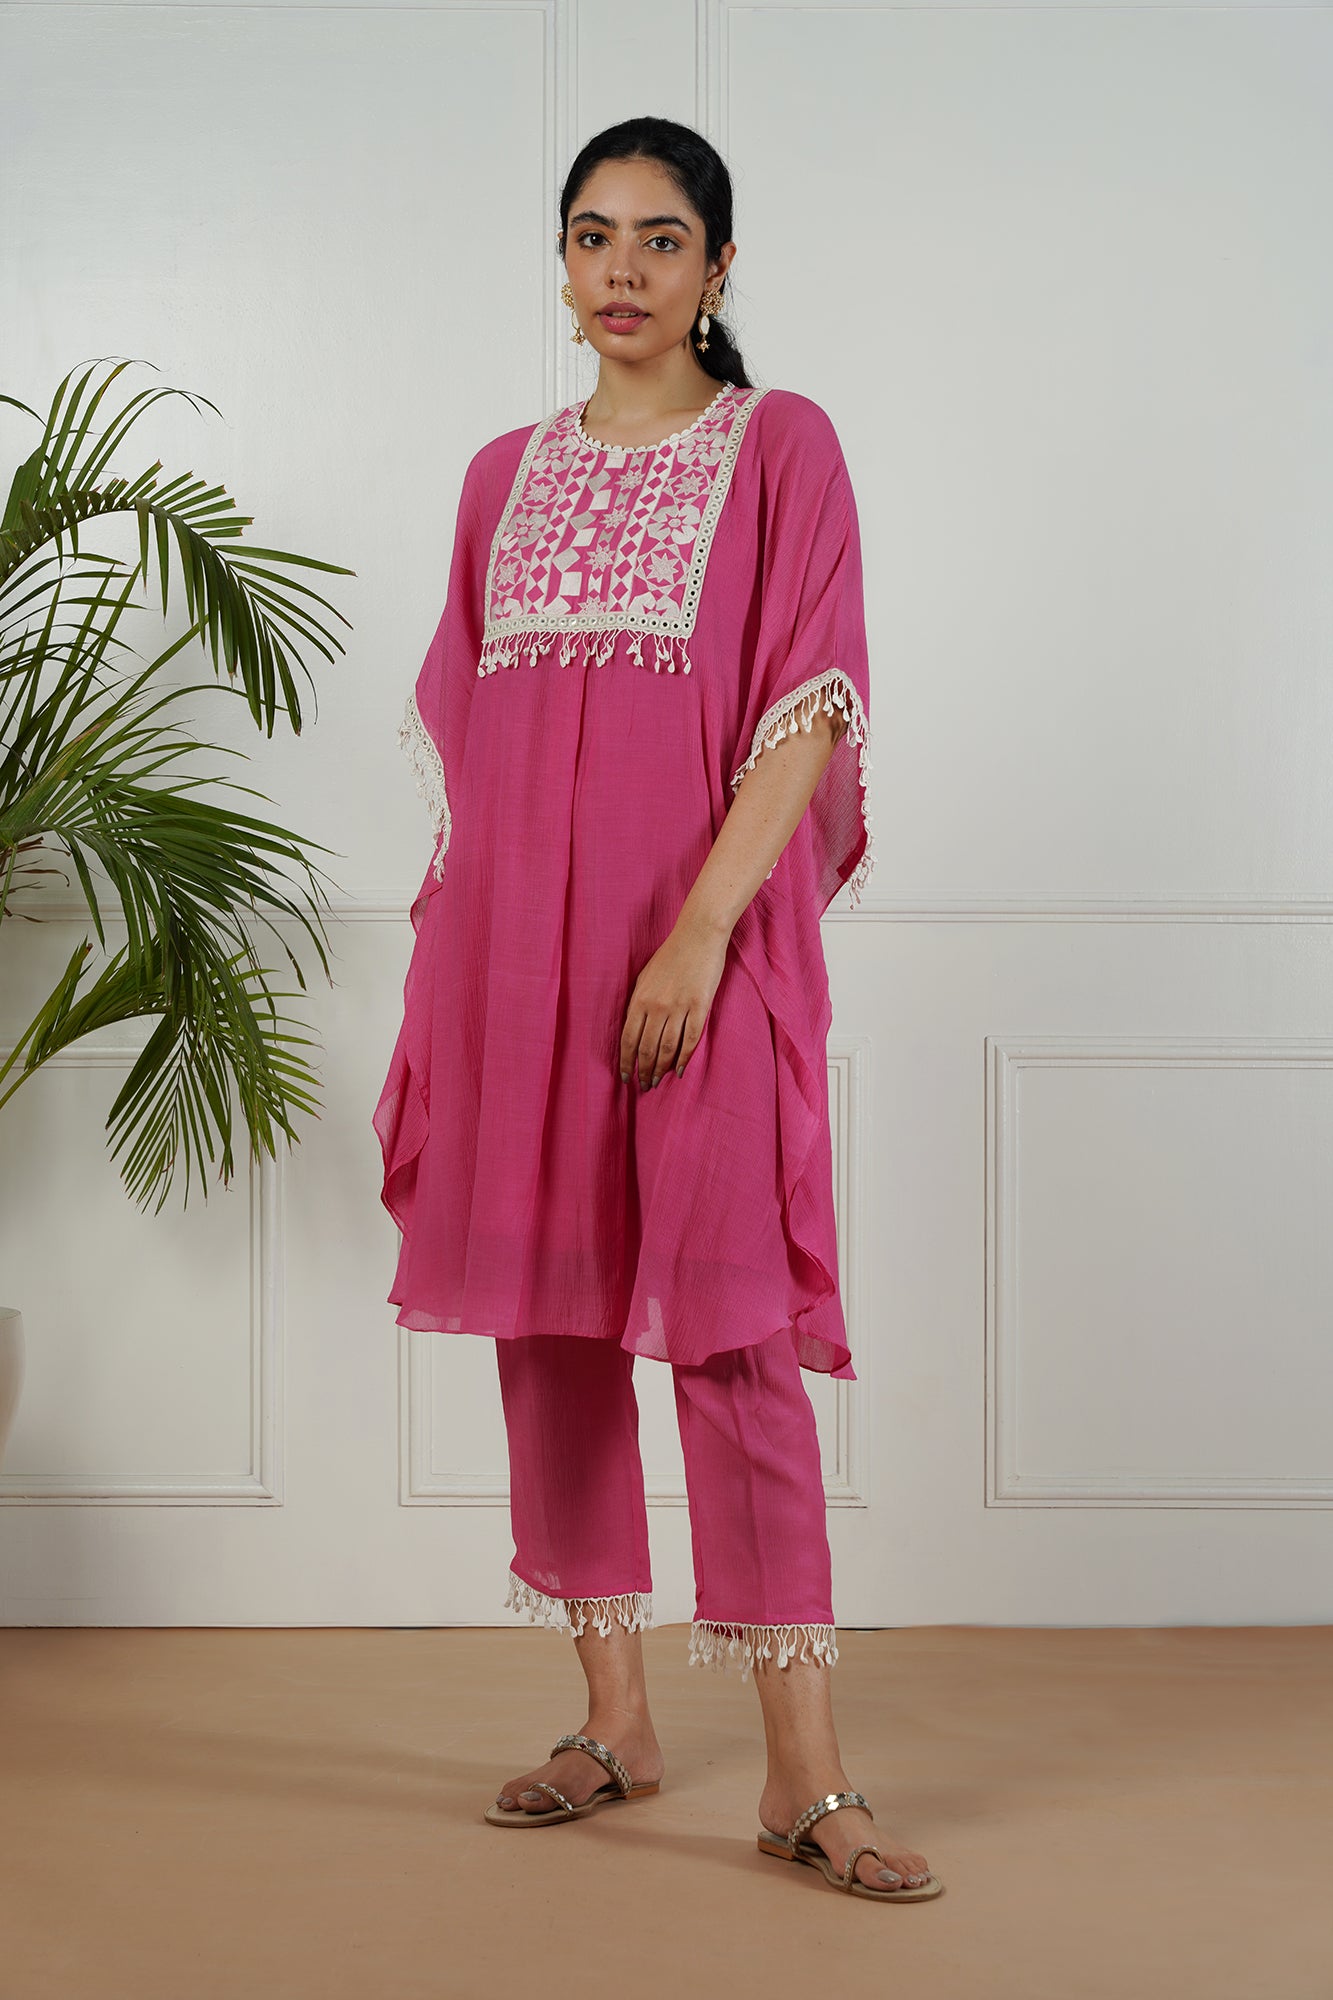 Bubble Gum Pink Bright Kaftan Set with embroidered yoke